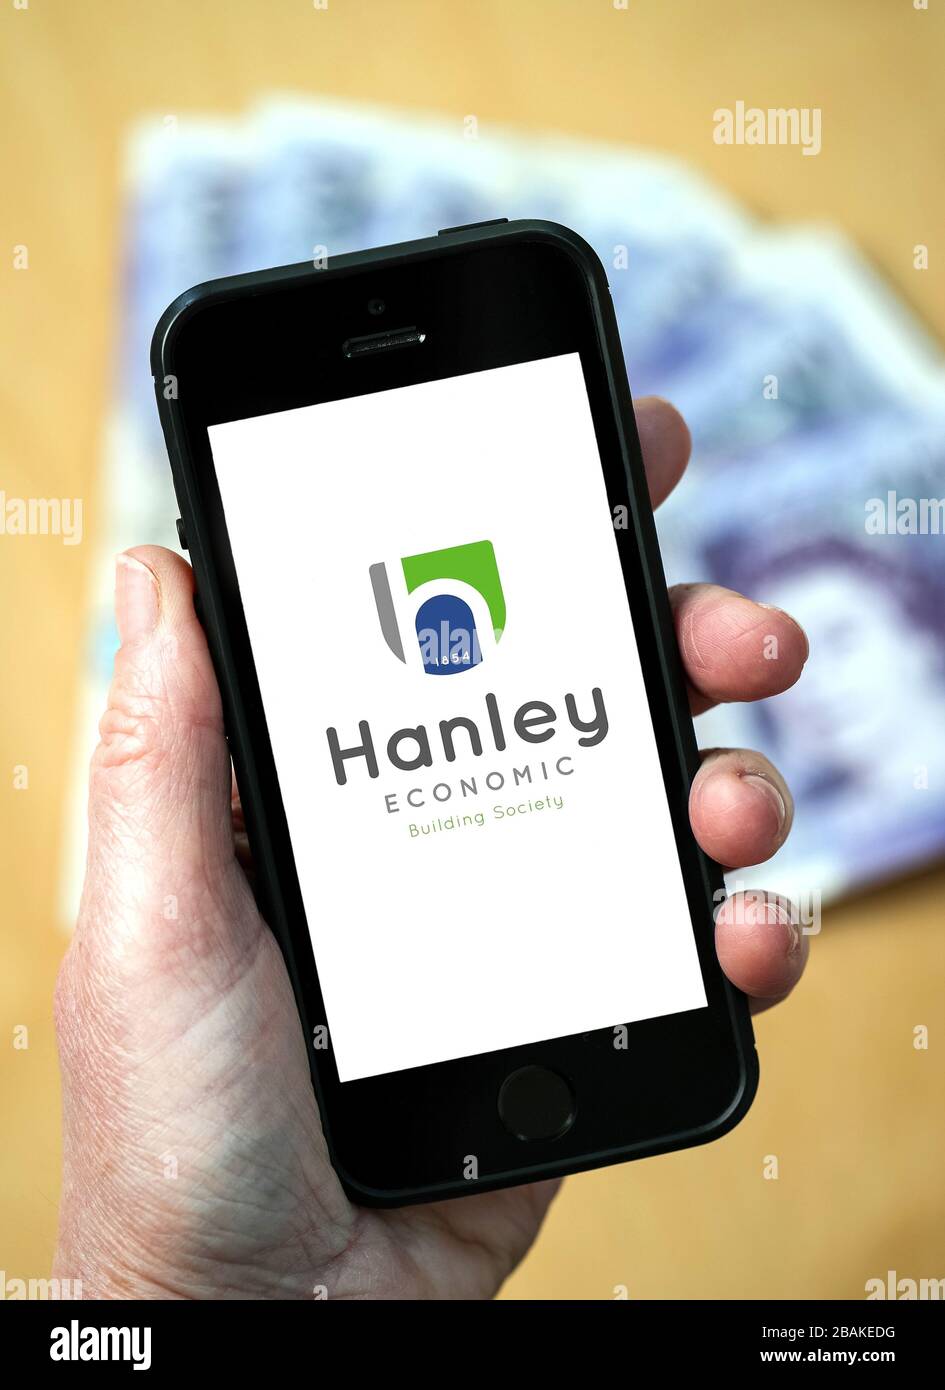 A woman holding a mobile phone showing Hanley Economic Building Society (editorial use only) Stock Photo